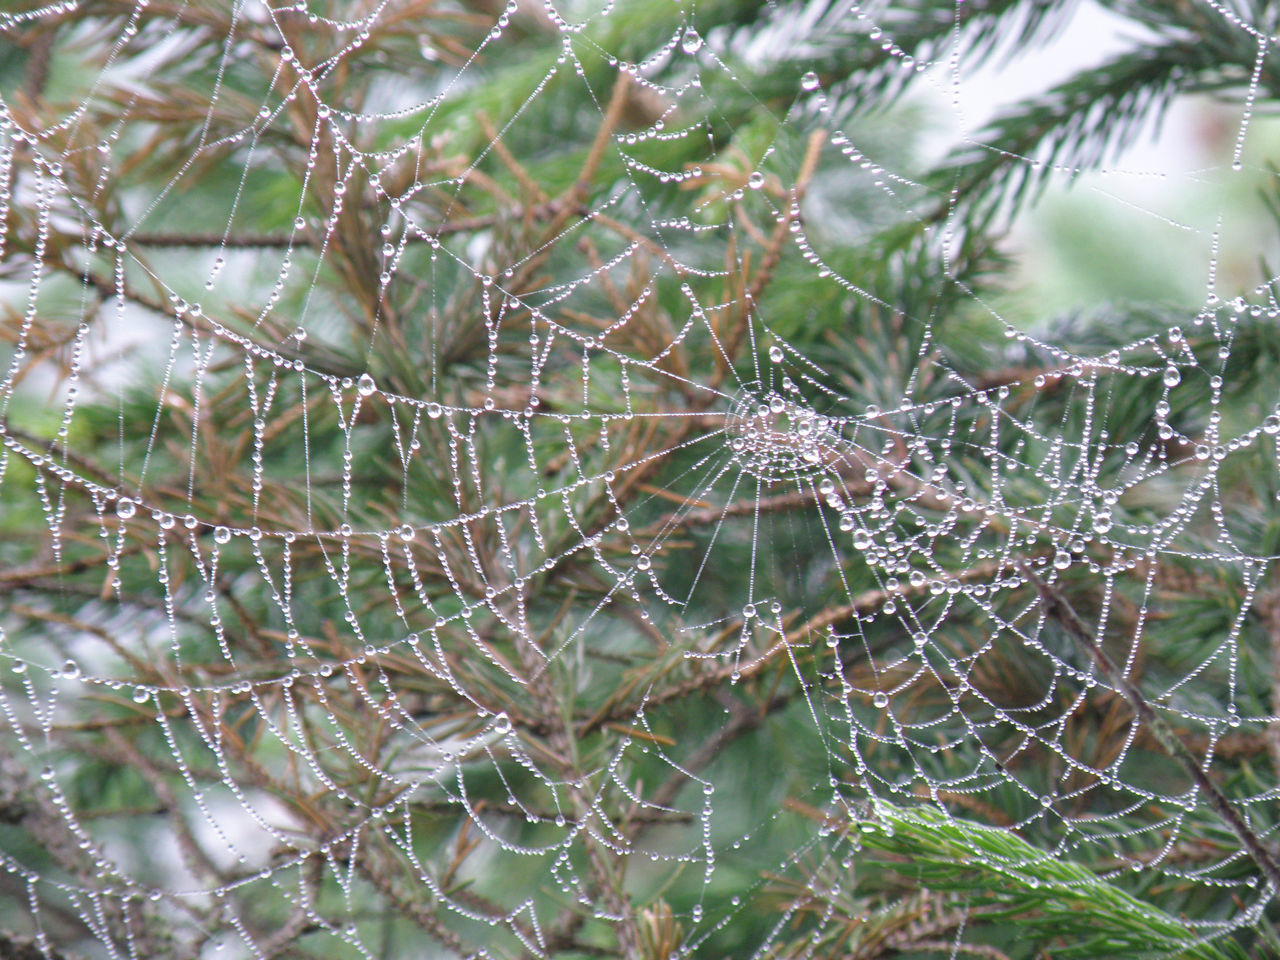 plant, spider web, fragility, close-up, nature, no people, focus on foreground, tree, day, beauty in nature, backgrounds, full frame, branch, growth, wet, complexity, drop, outdoors, green, tranquility, pattern, water, leaf, plant part, selective focus, spider, environment